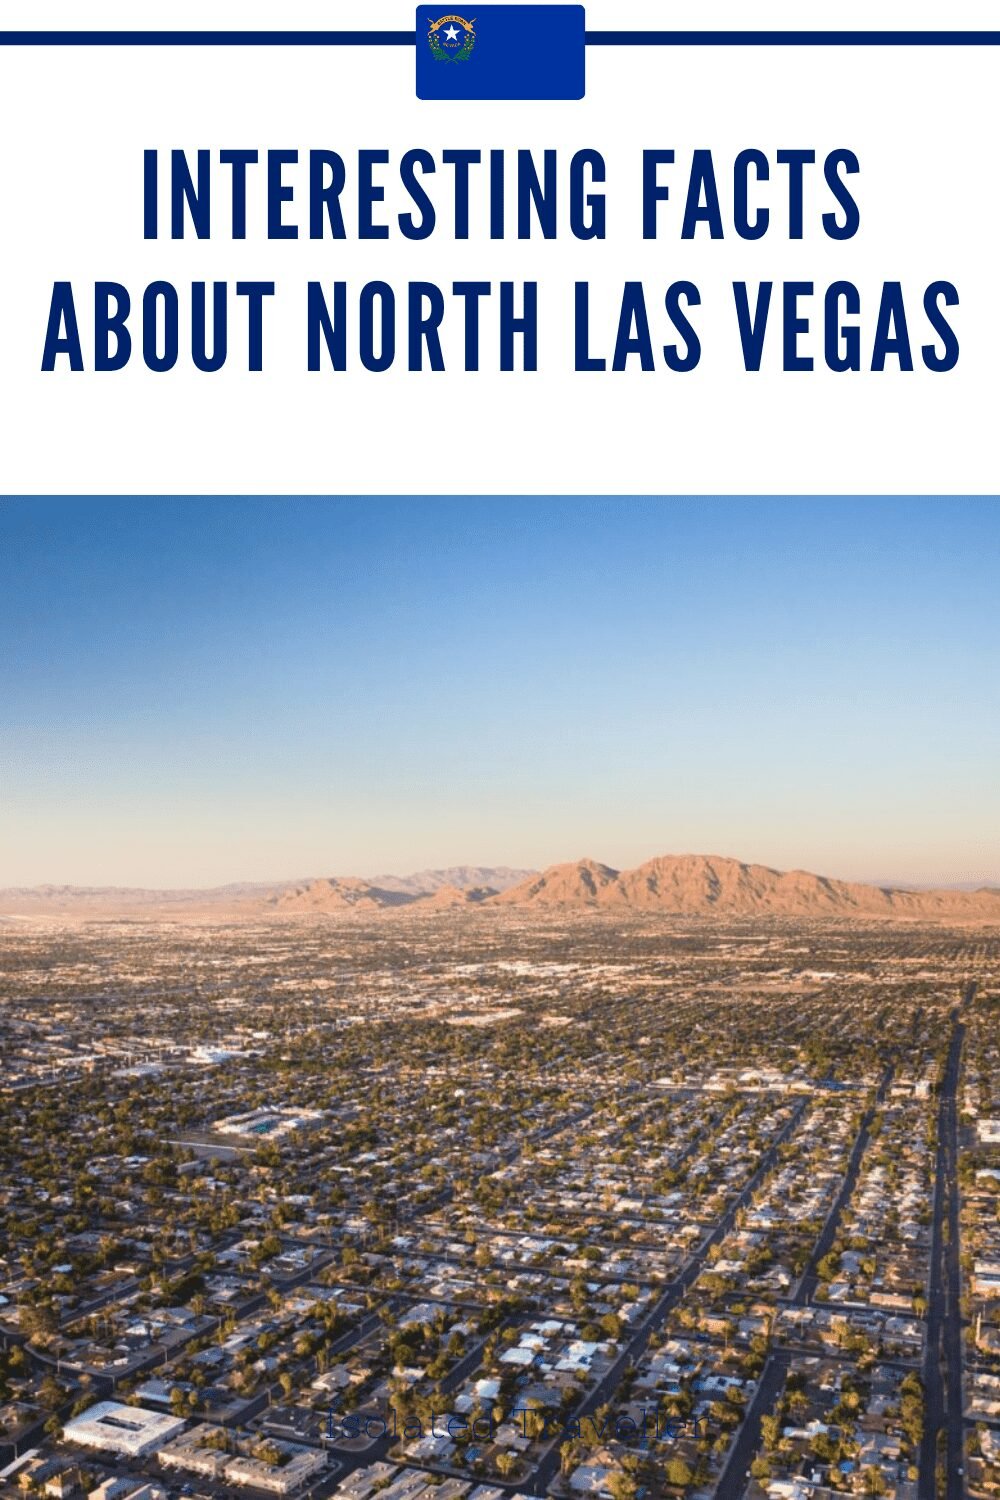 Facts About North Las Vegas